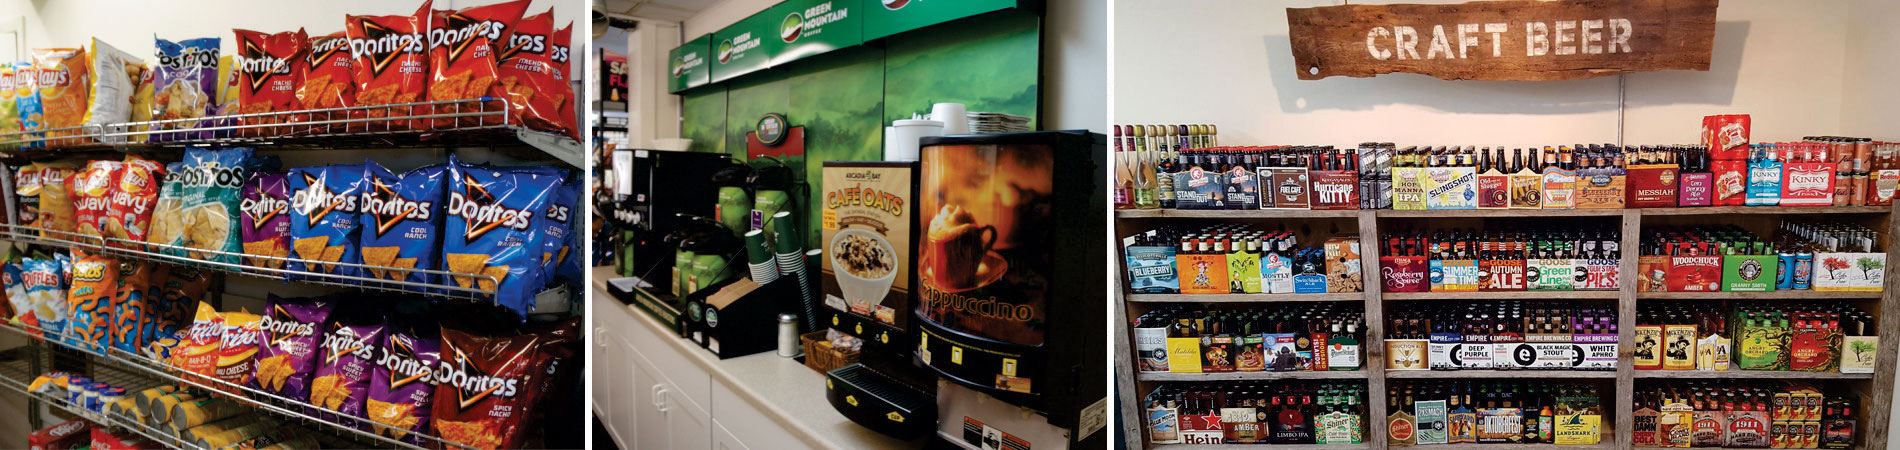 The Center MiniMart's snack, coffee and beer selection